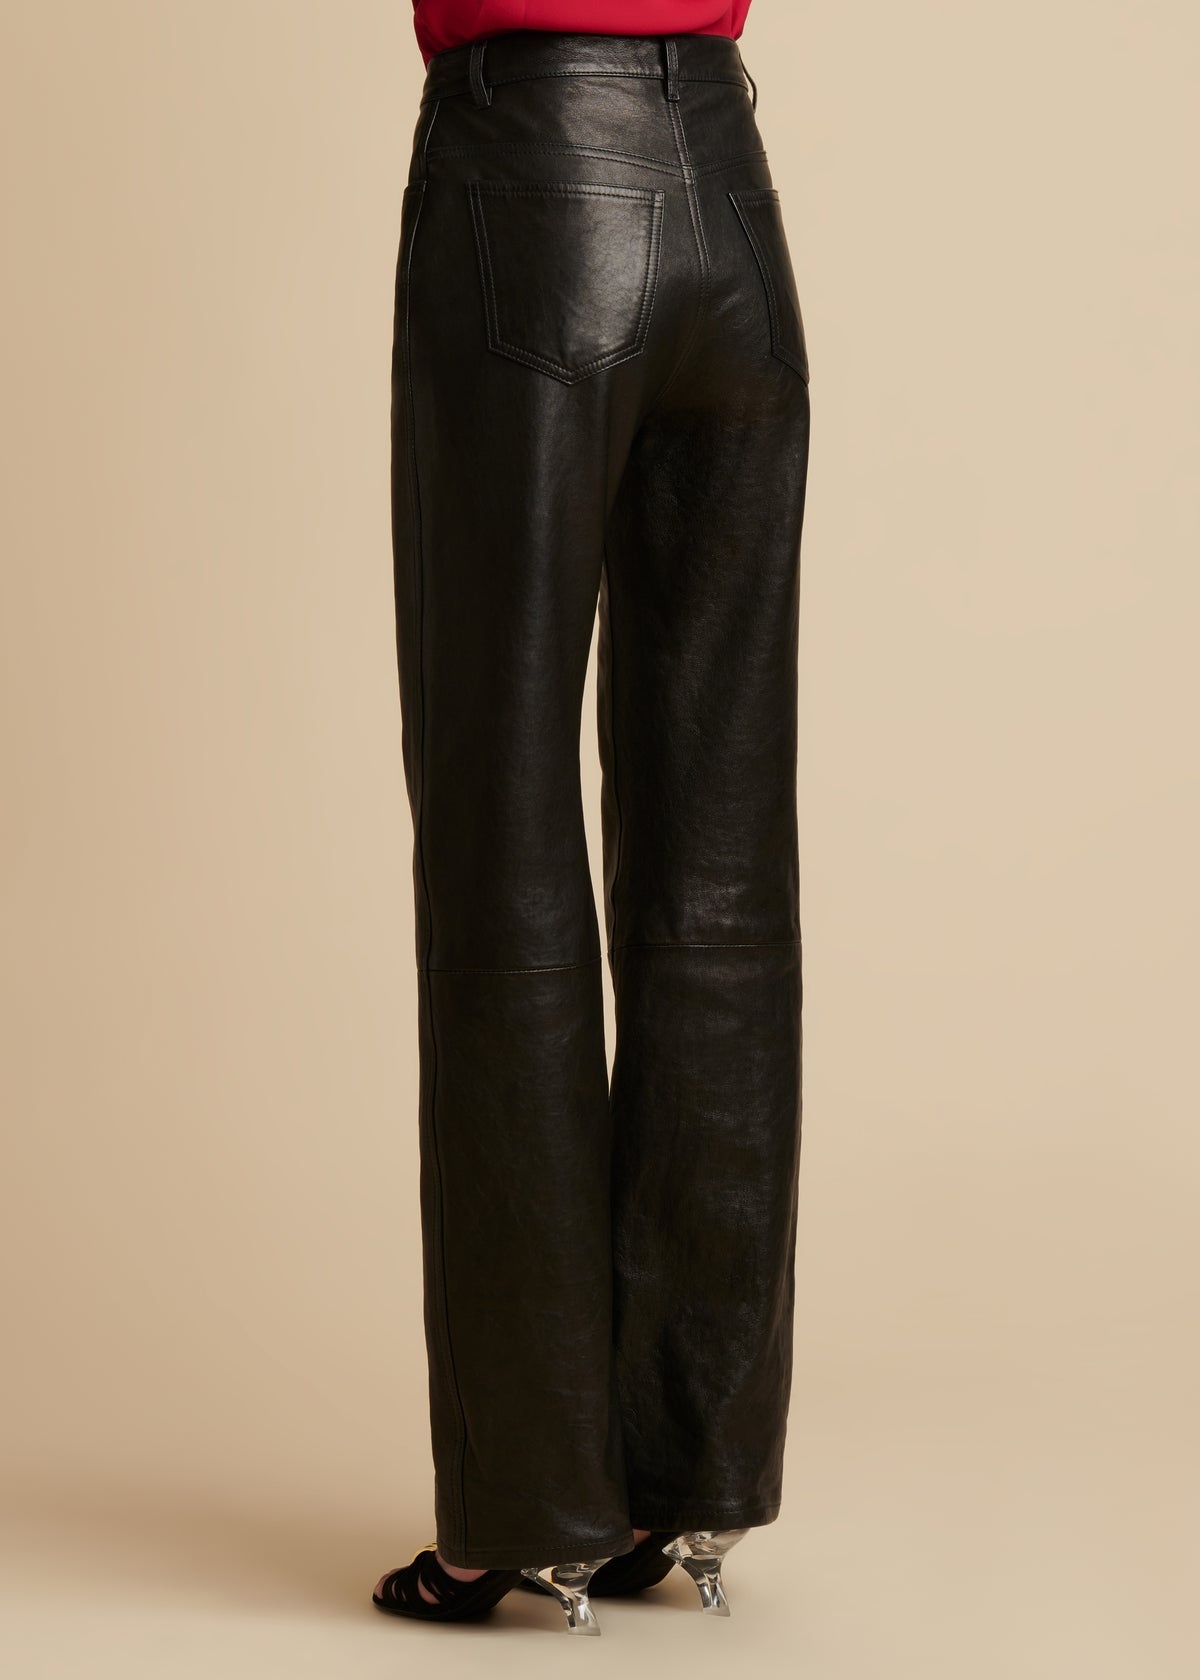 The Danielle Pant in Black Leather - 3